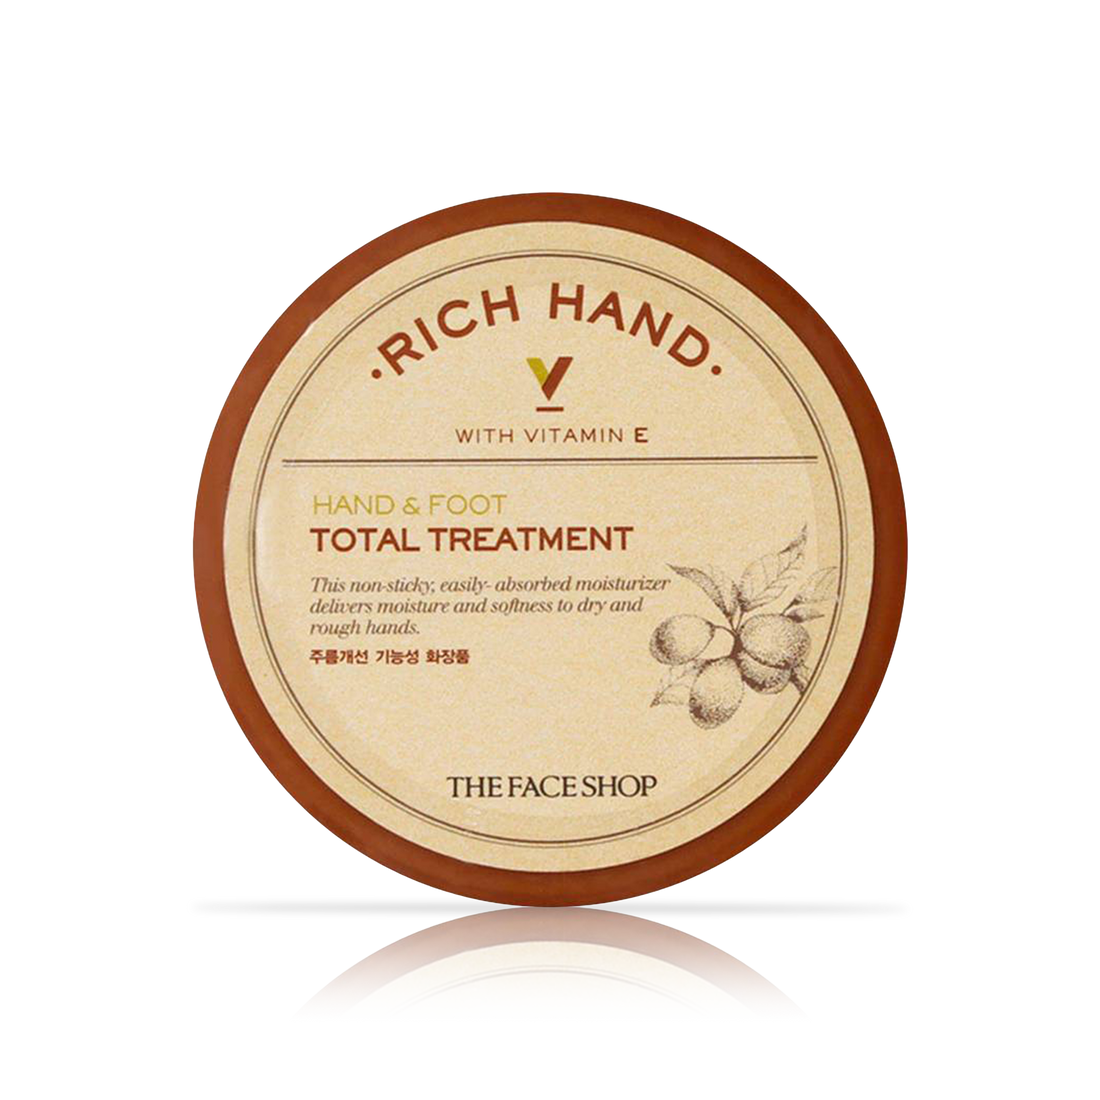 Rich Hand V Hand &amp; Foot Total Treatment